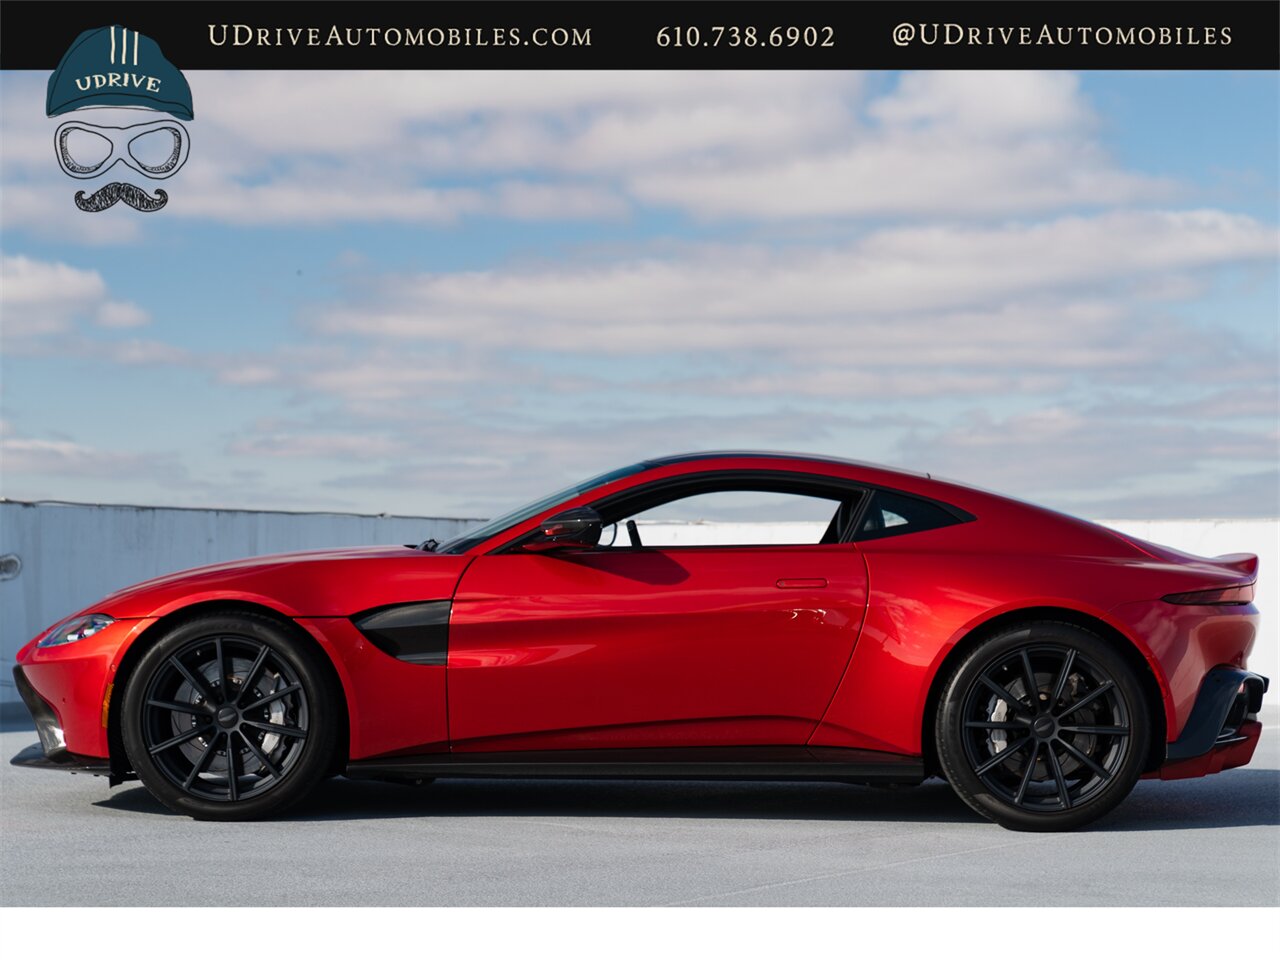 2019 Aston Martin Vantage  Incredibly Spec Rare Q Exclusive Fiamma Red $222k MSRP 1 of a Kind CPO - Photo 9 - West Chester, PA 19382